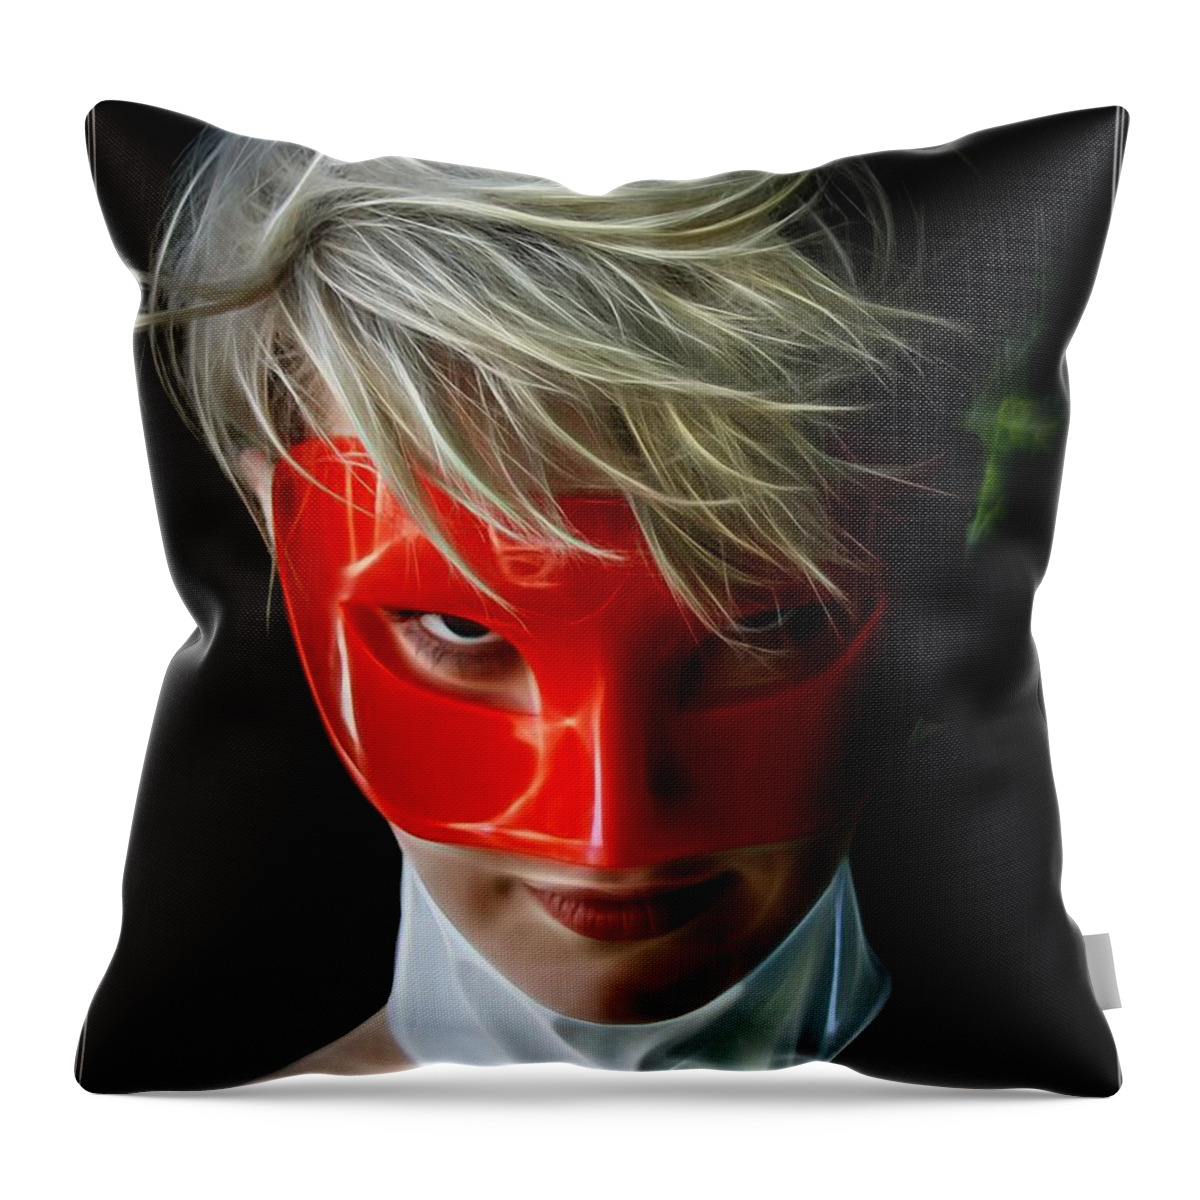 Fantasy Throw Pillow featuring the painting Wicked Portrait Of A Heroine by Jon Volden